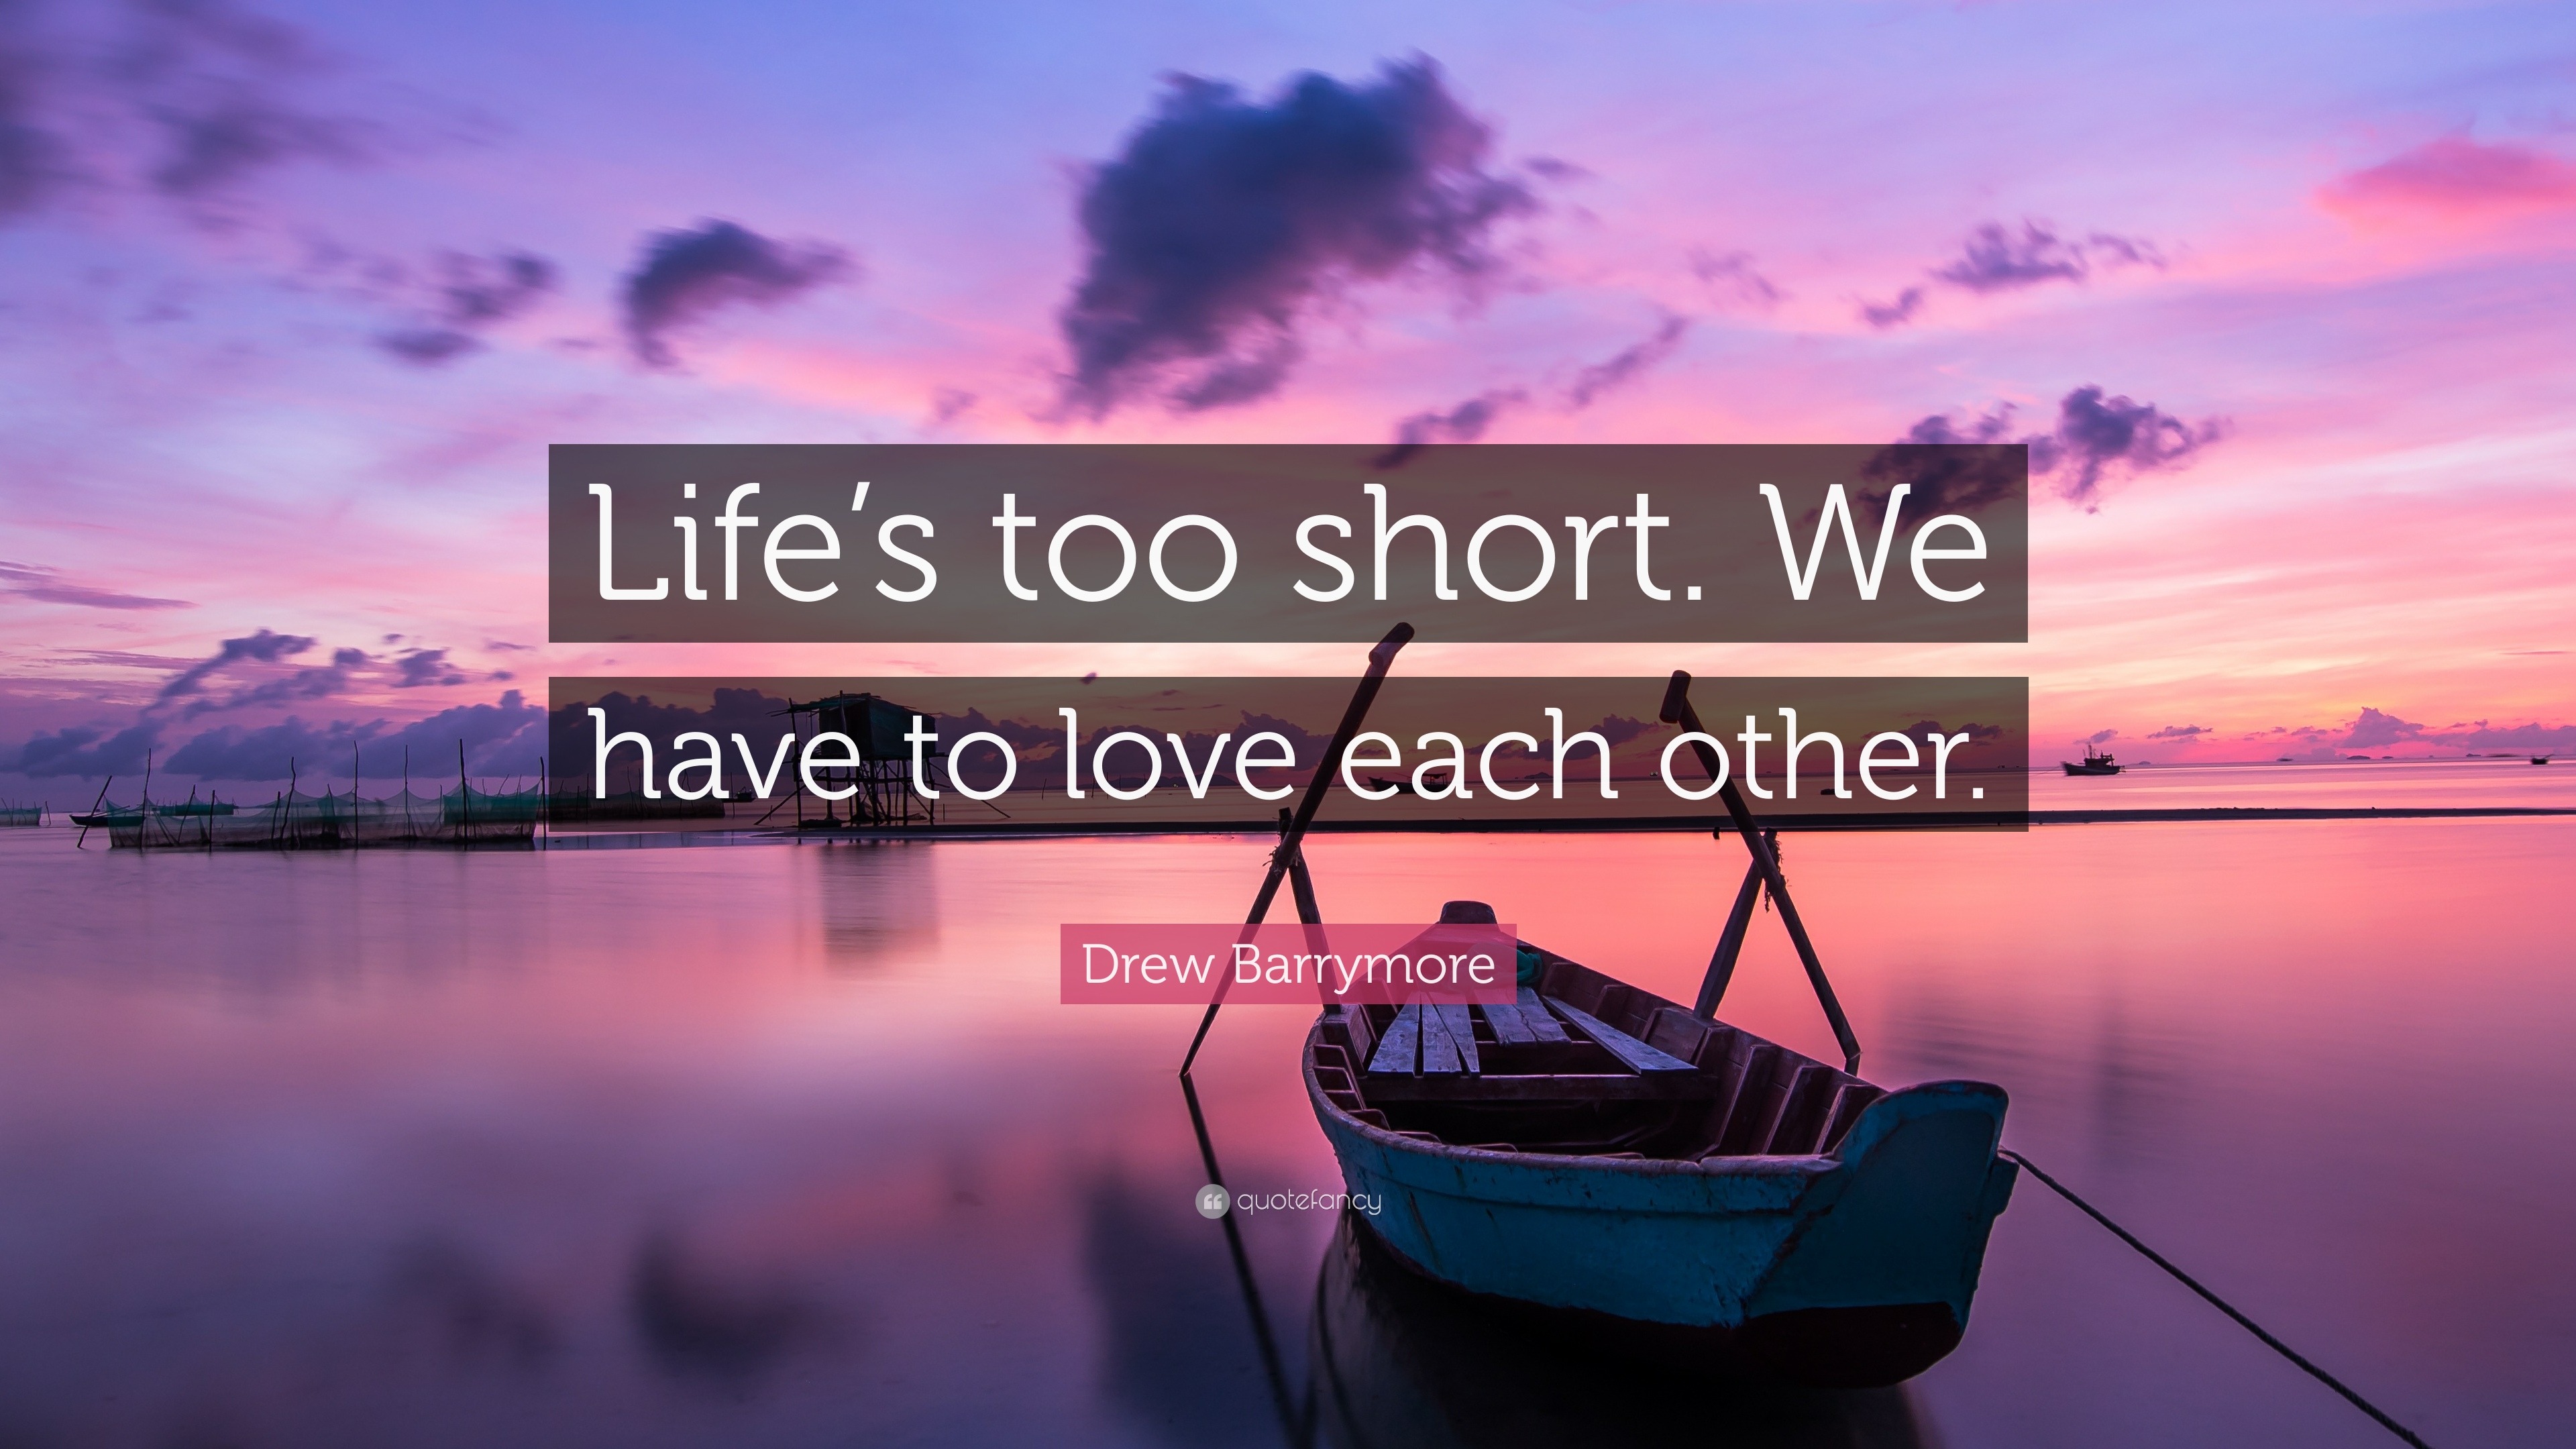 Drew Barrymore Quote  Life s too short We have to love  